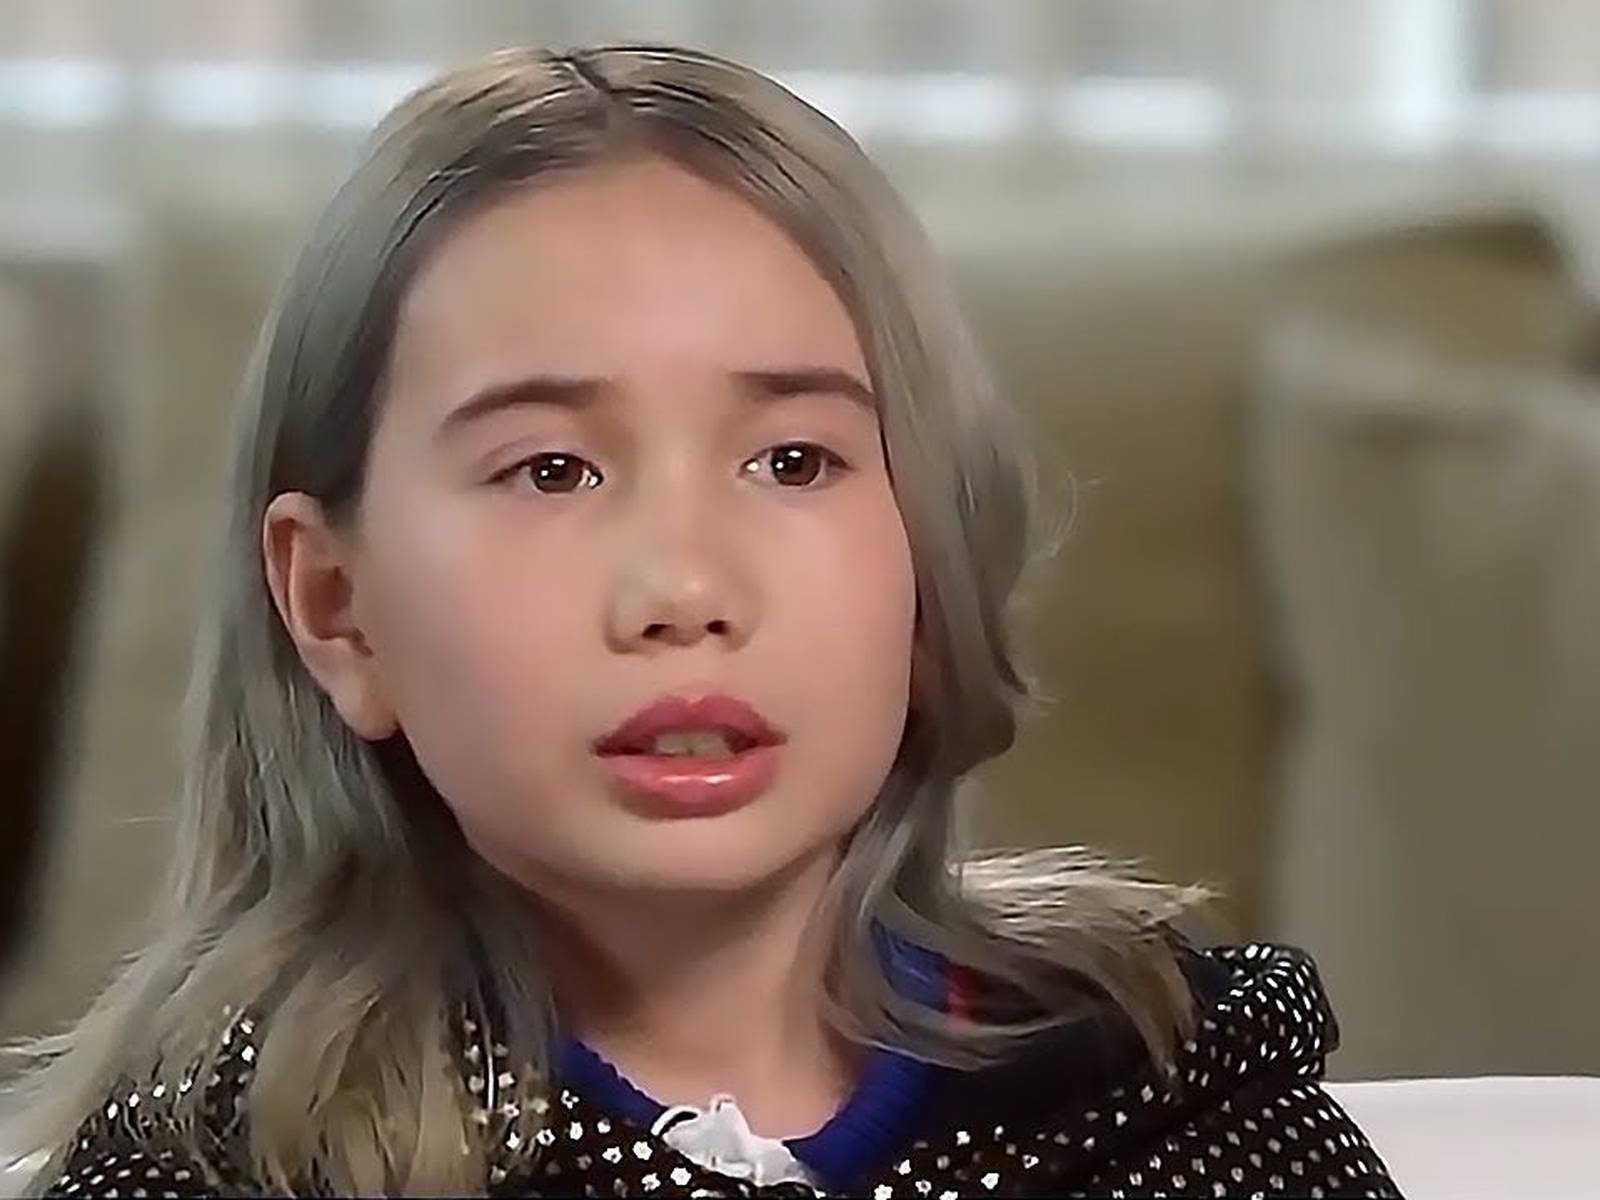 Where Is Lil Tay Now?